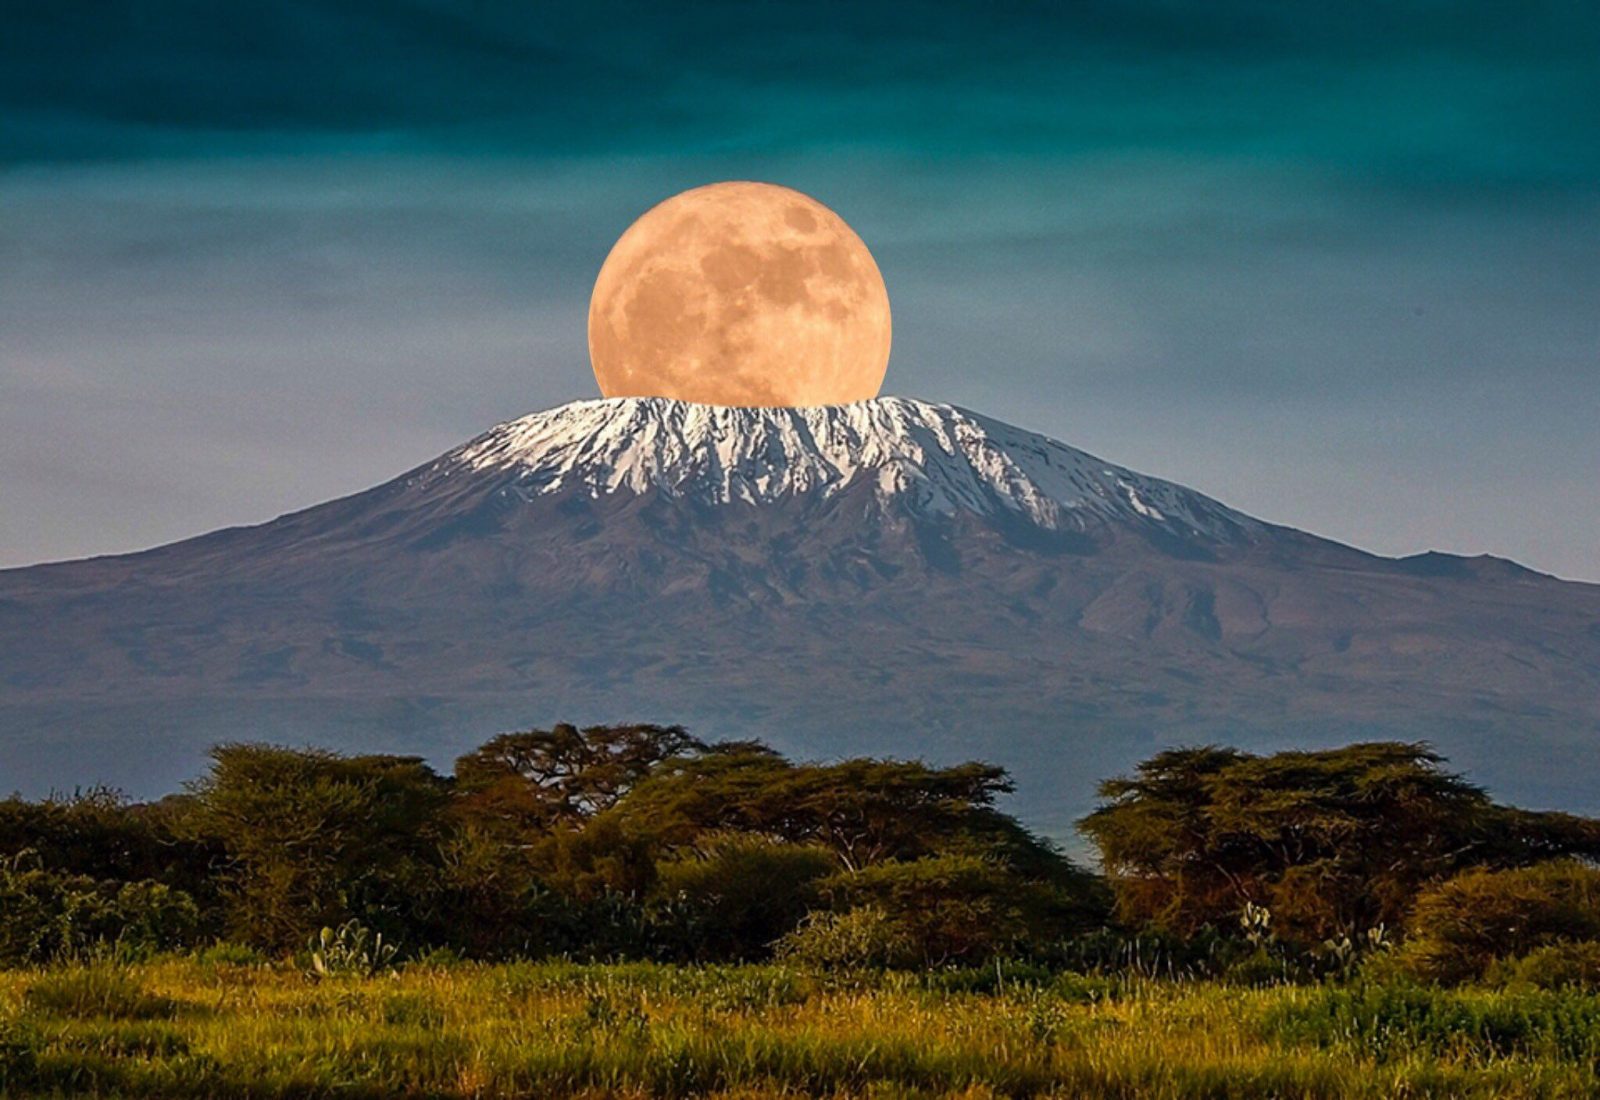 Do You Have the Smarts to Pass This World Geography Quiz With Flying Colors 🌈? Mount Kilimanjaro full moon